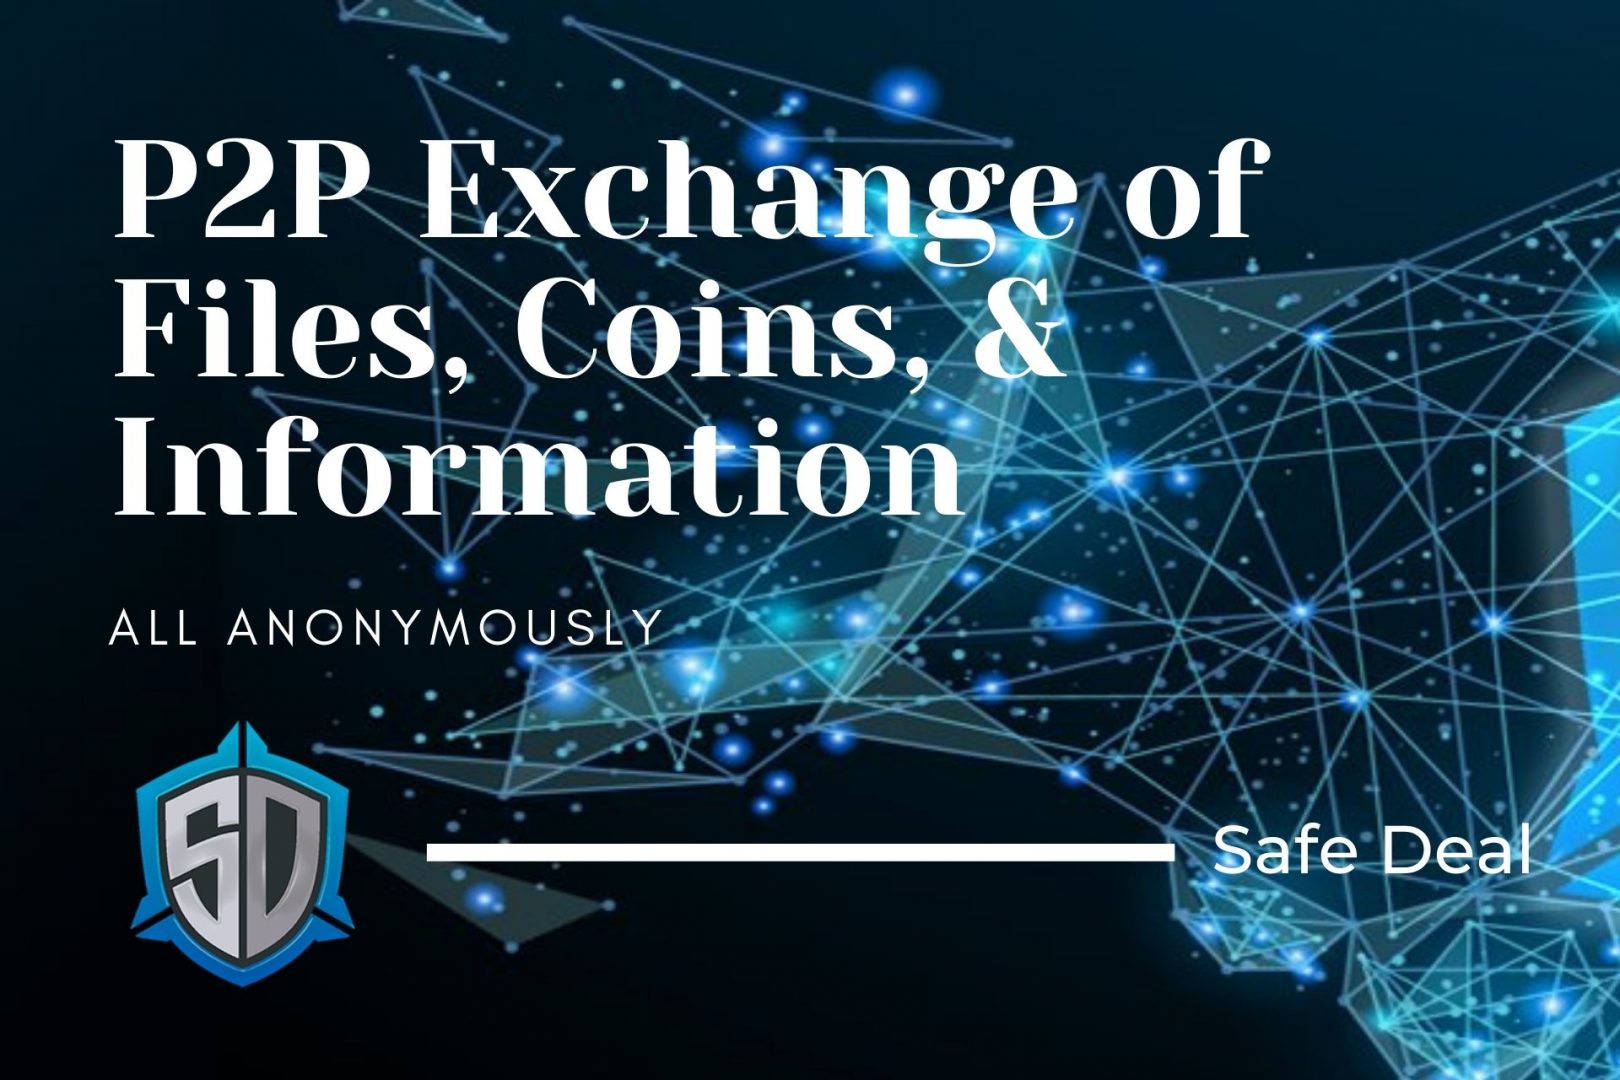 Safe Deal - Allowing P2P Exchange of Files, Coins ...